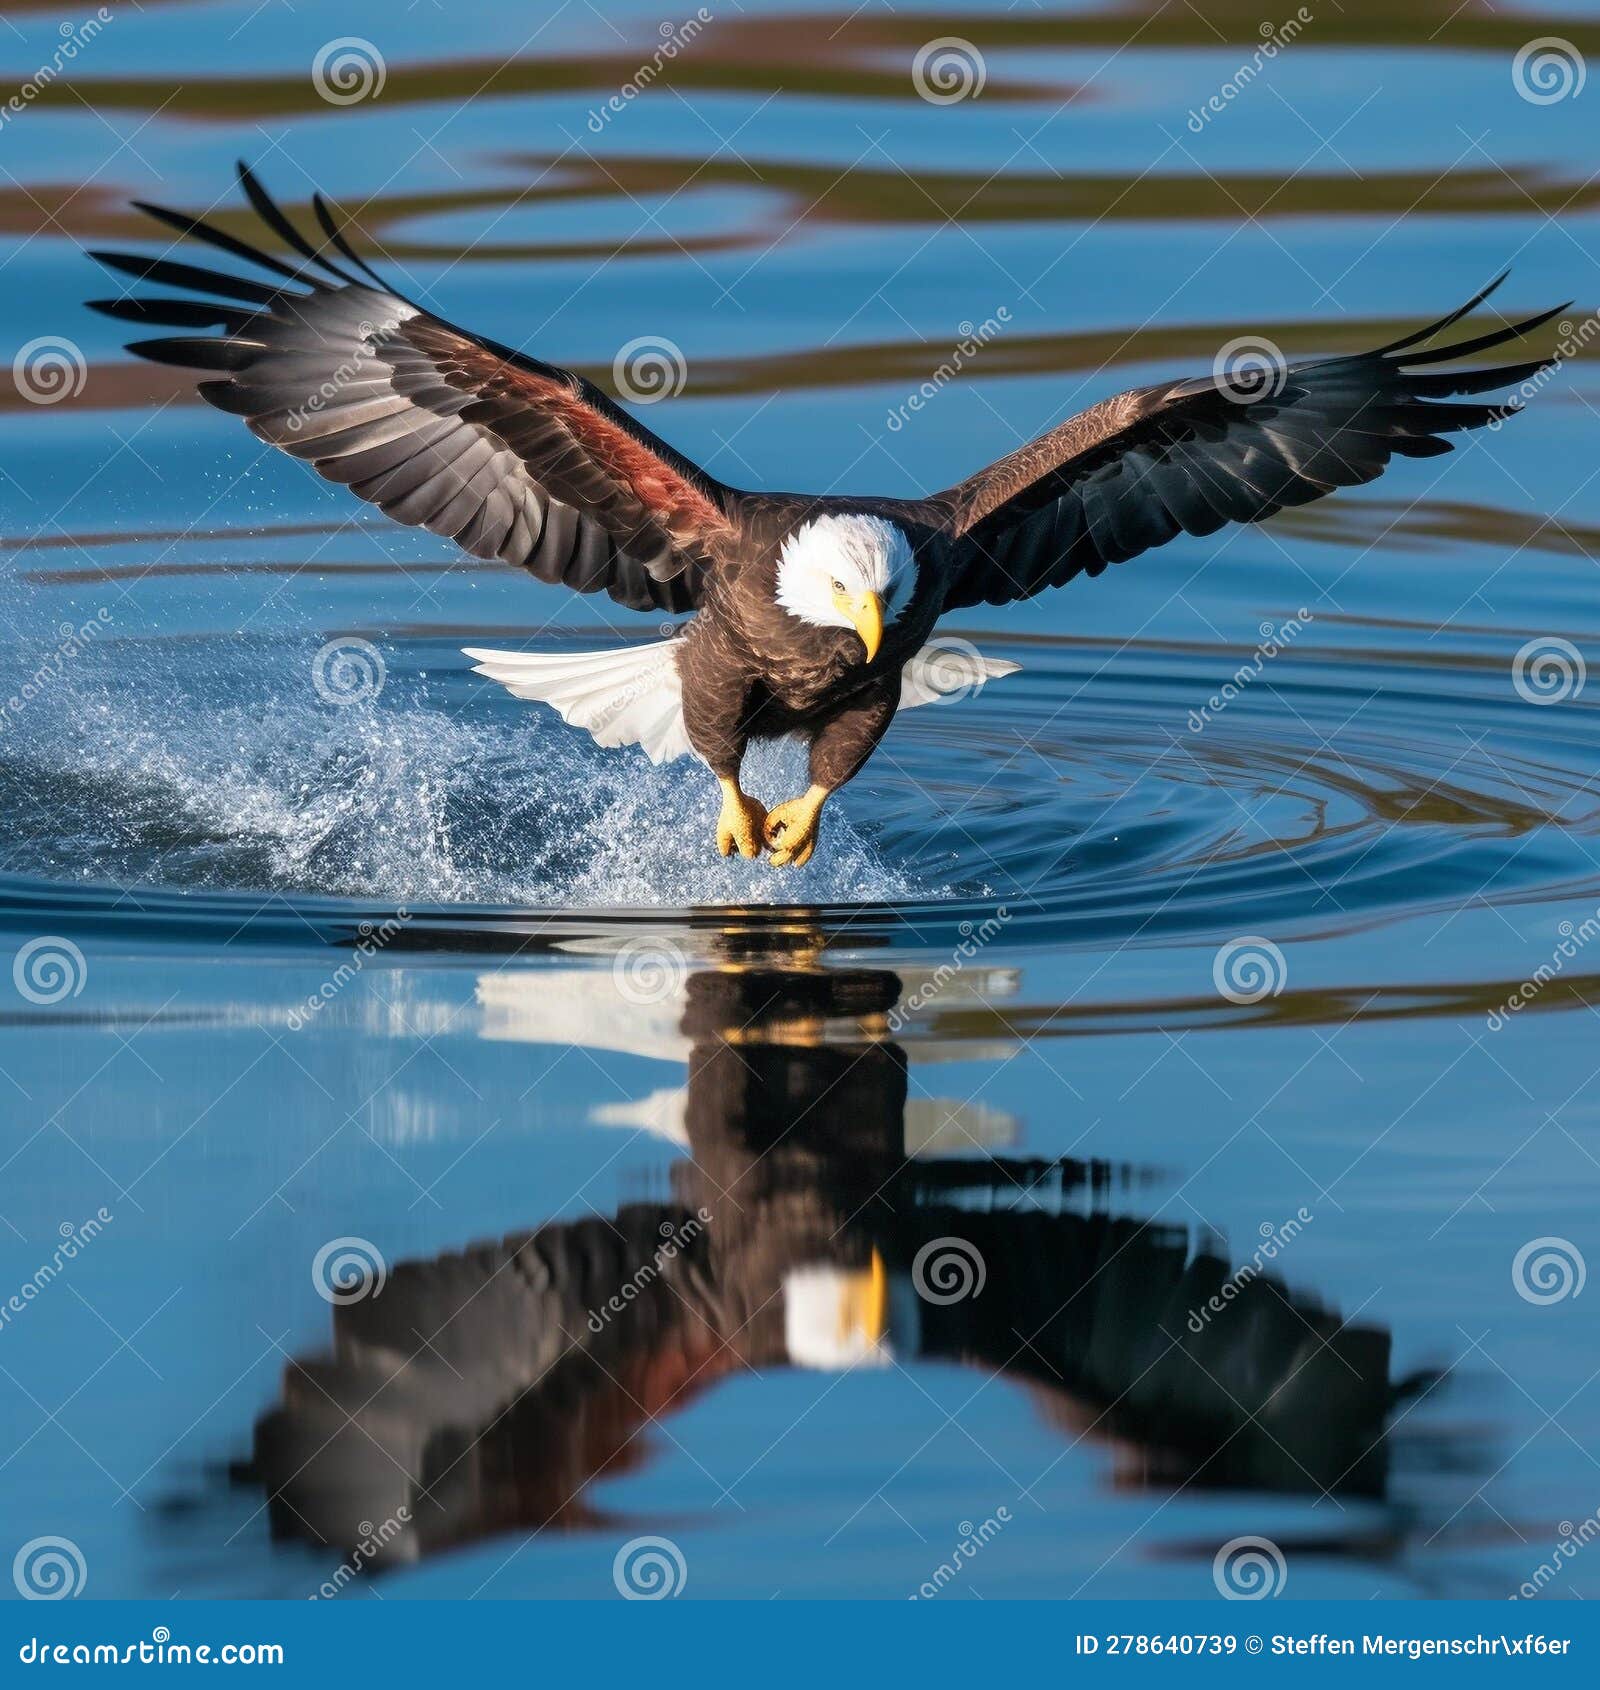 majestic bald eagle soaring above water